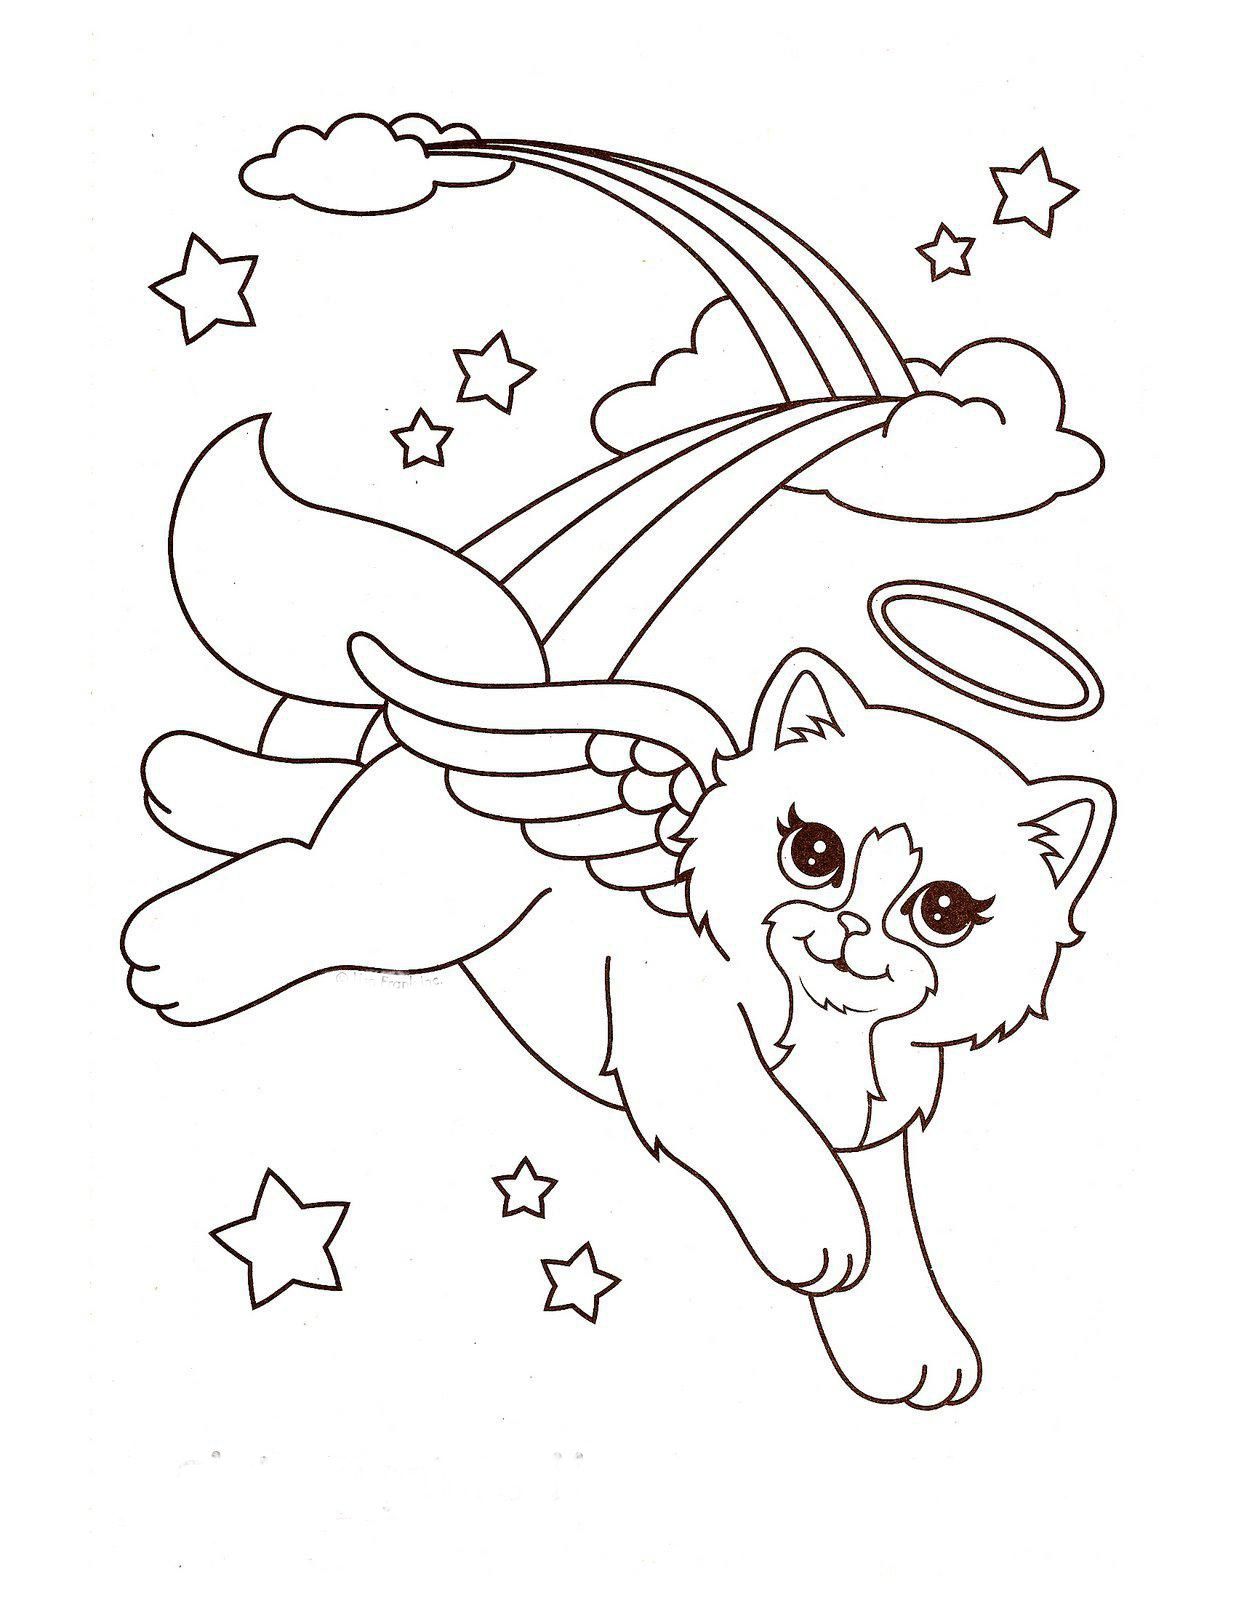 all lisa frank coloring pages | Best Coloring Page Site